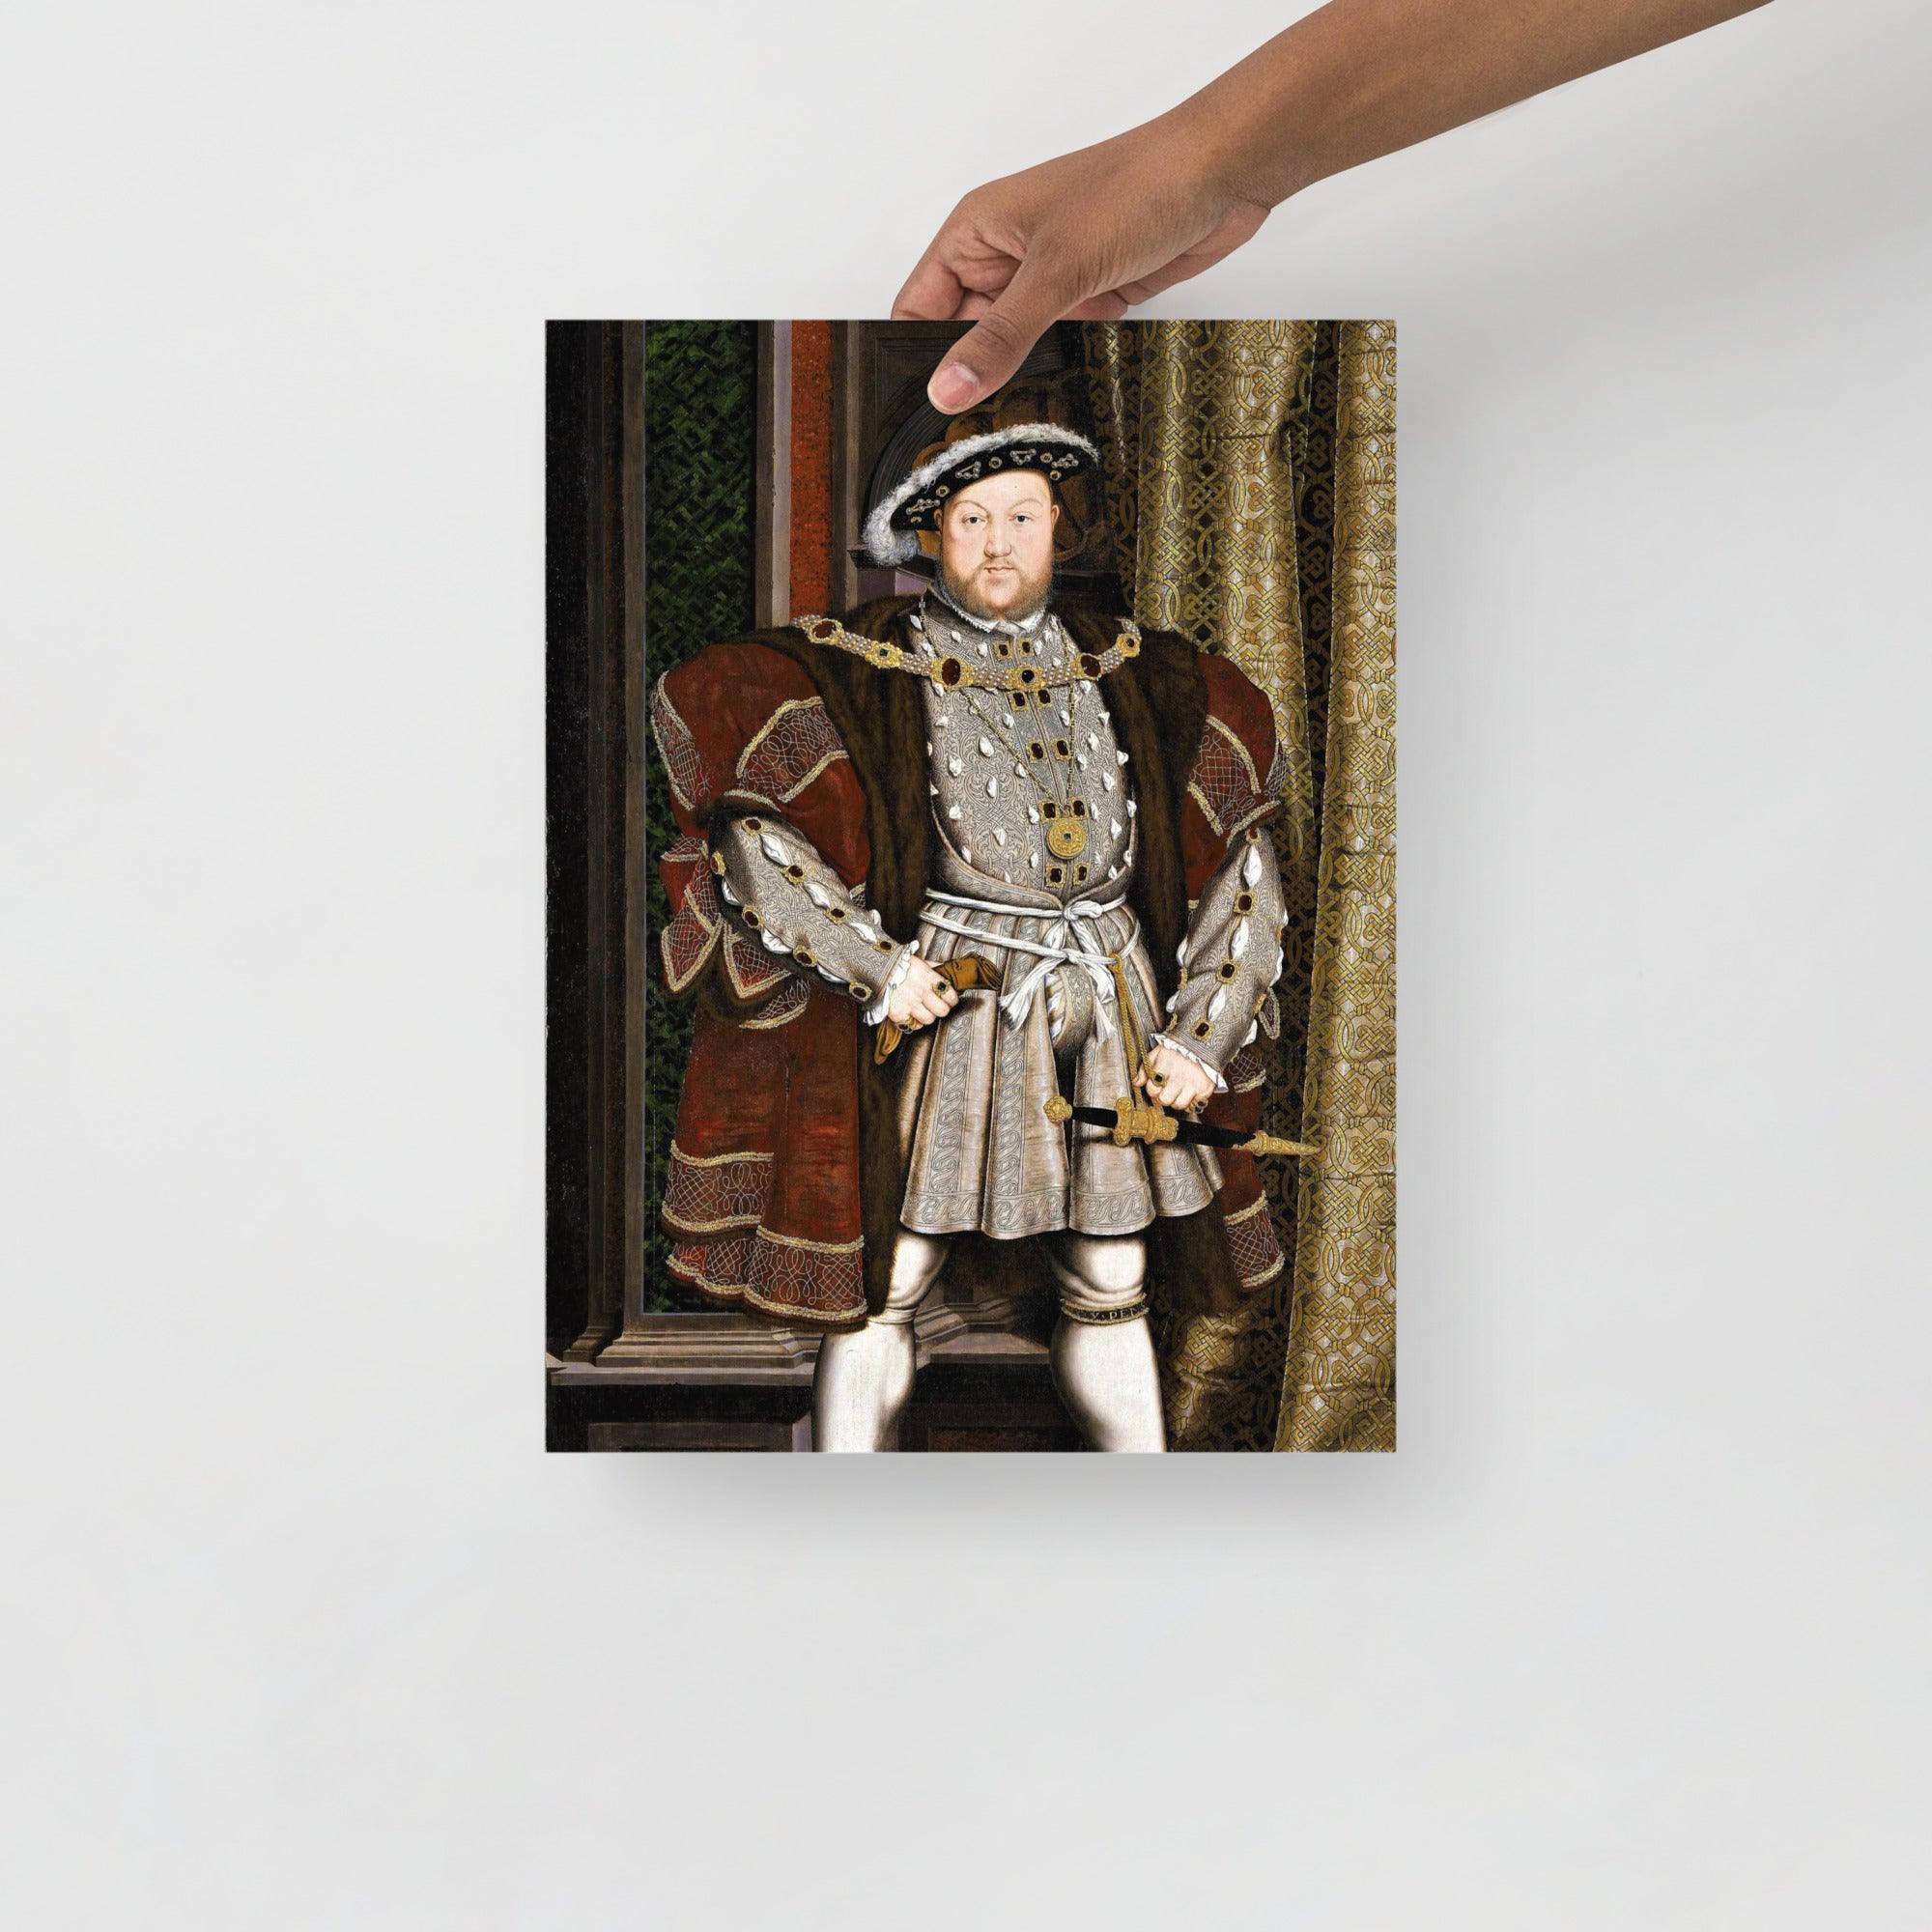 A Henry VIII Of England poster on a plain backdrop in size 12x16”.